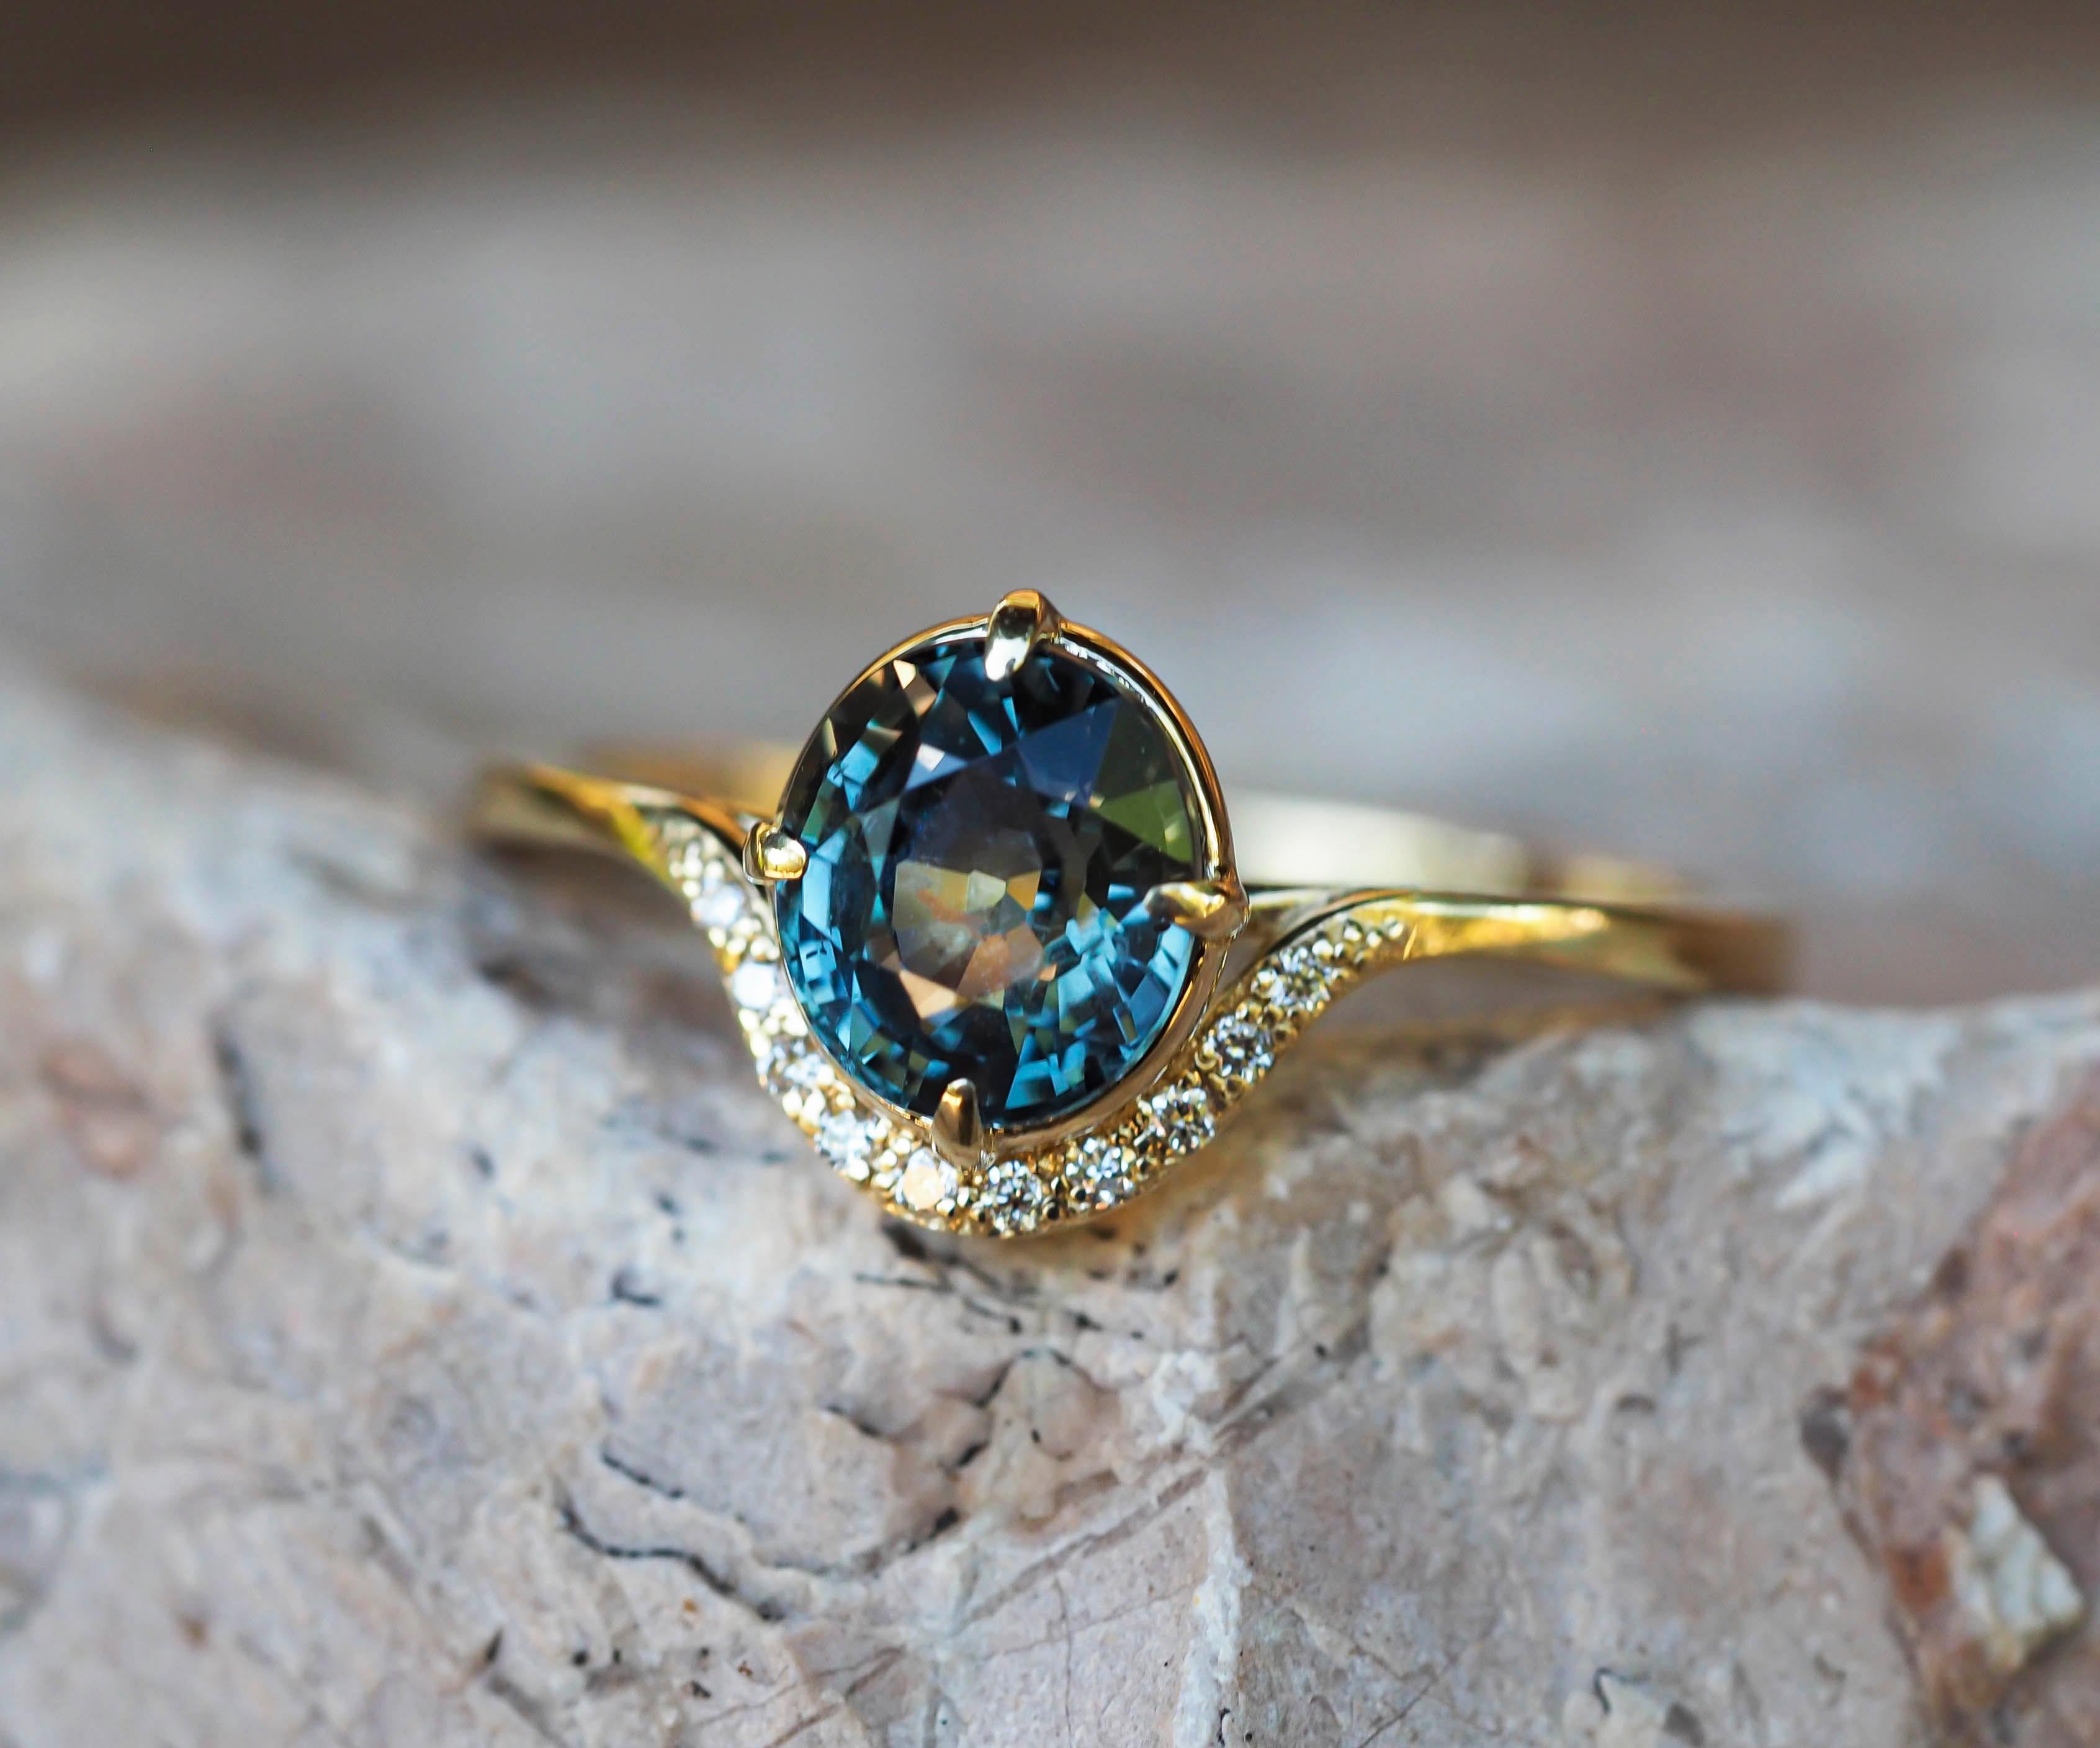 14 kt gold ring with sapphire and diamonds.
Weight: 2.00 g.

Set with sapphire, color - bluish, yellowish green
oval cut, aprox 1.2 ct
Clarity: Transparent with inclusions
Surrounding stones: 10 diamond 0.01x10=0.10 ct (F/VS), round brilliant cut.